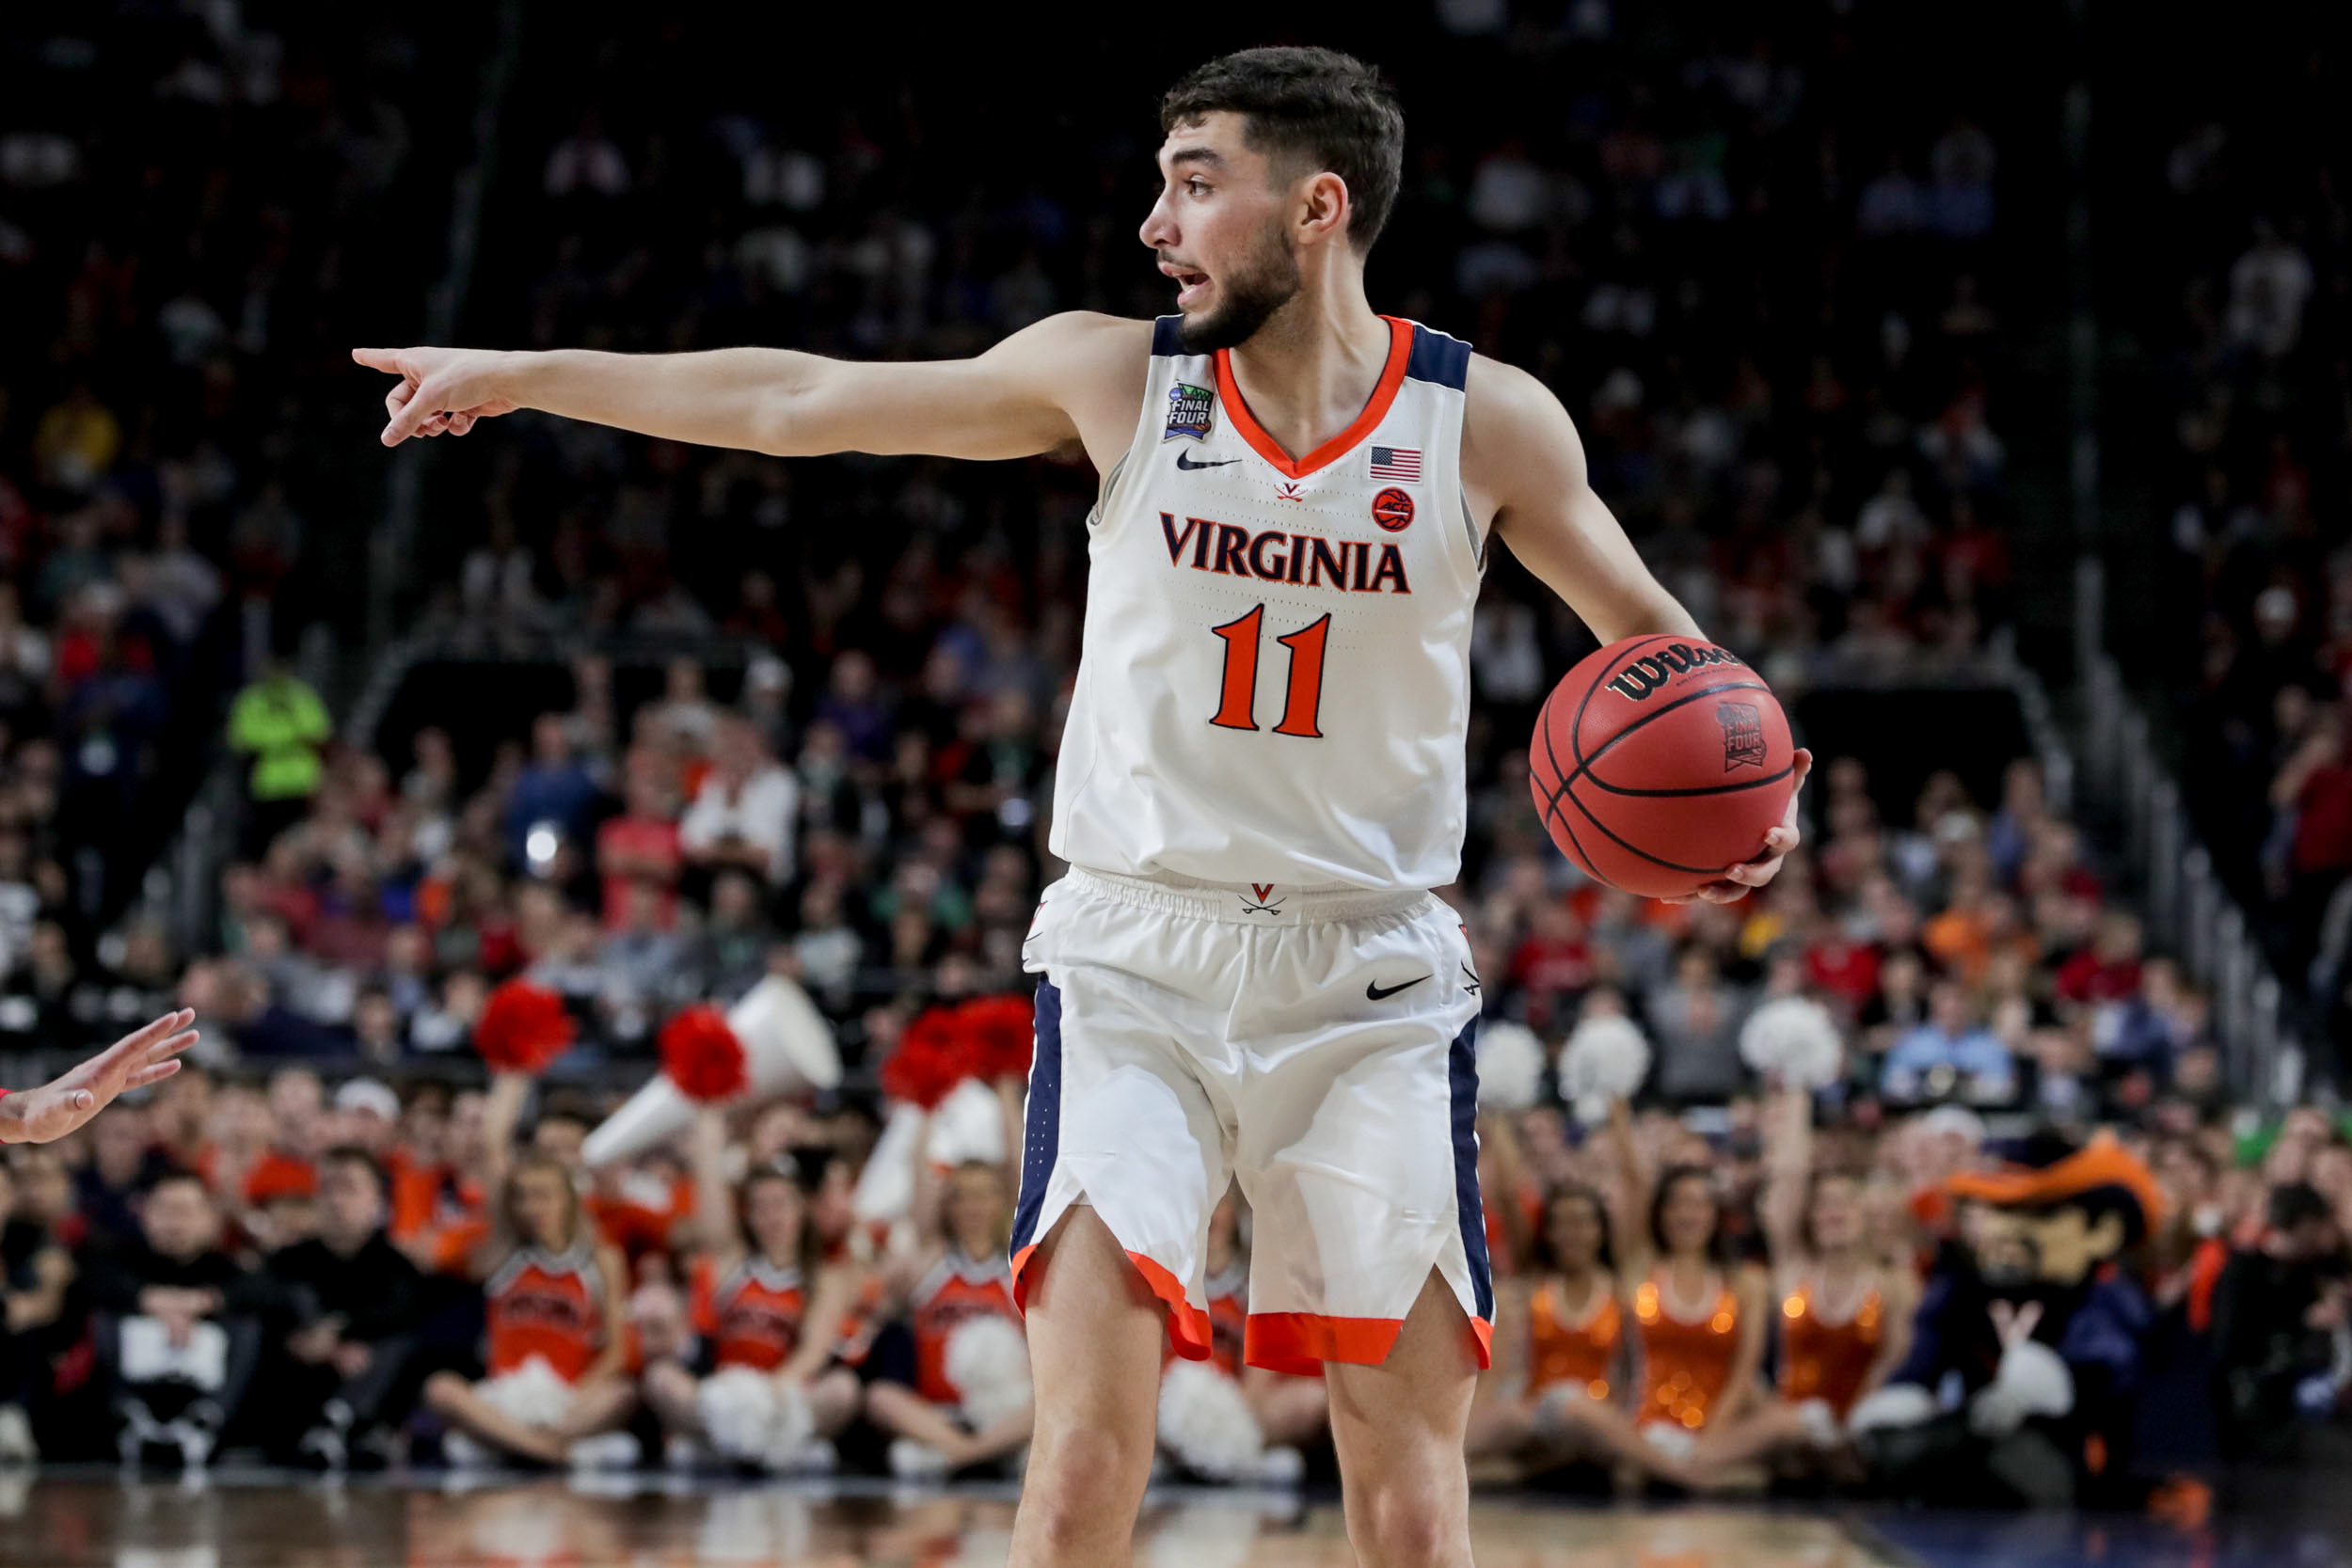 UVA basketball player dribbling the ball and pointing